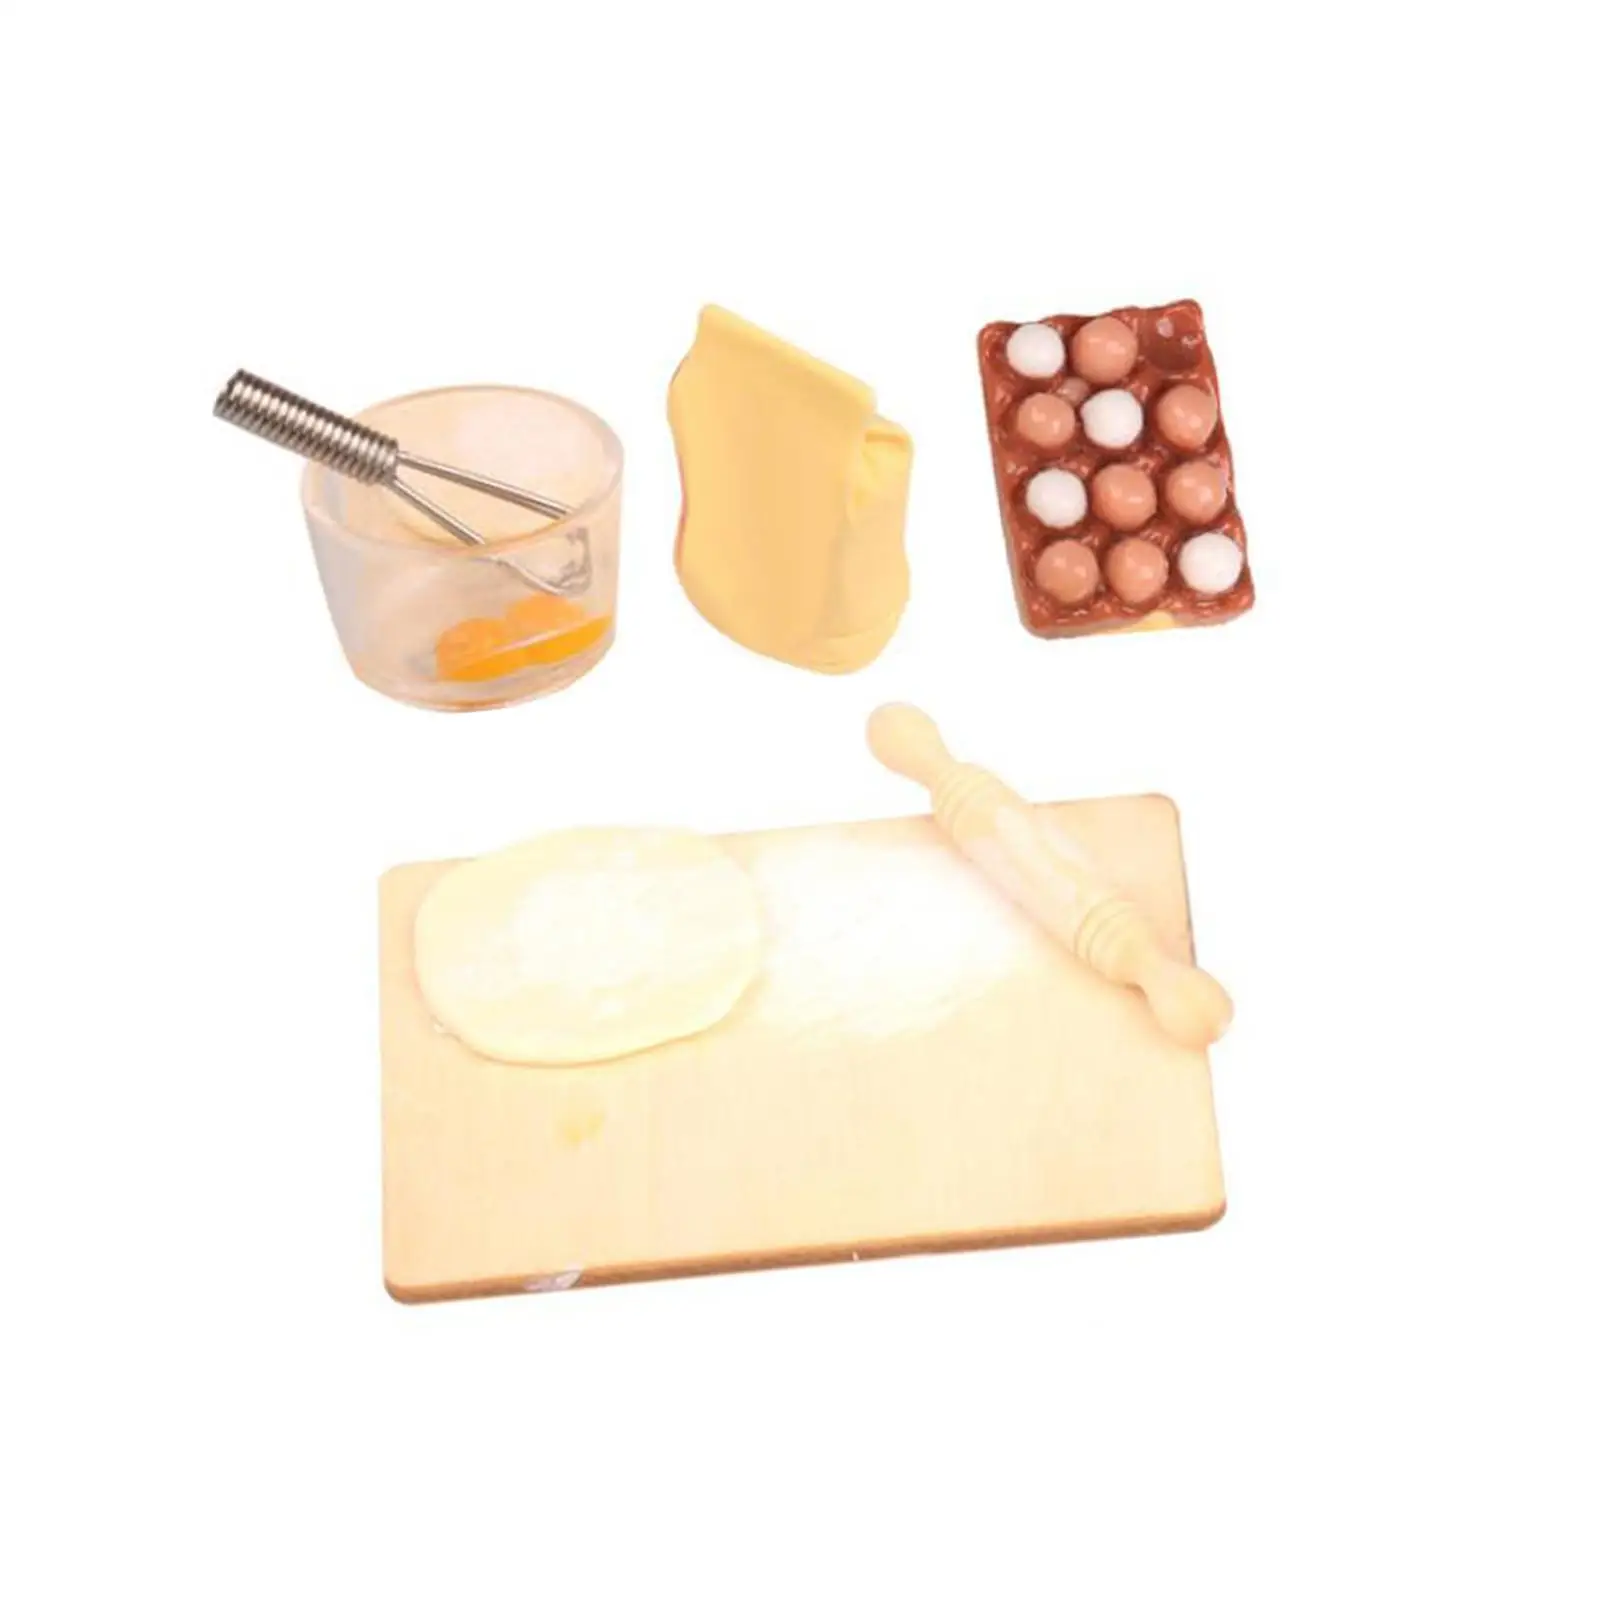 1:12 Miniature Food Baking, Bread Making Set, Pastry Toy, Dollhouse Kitchen Accessories